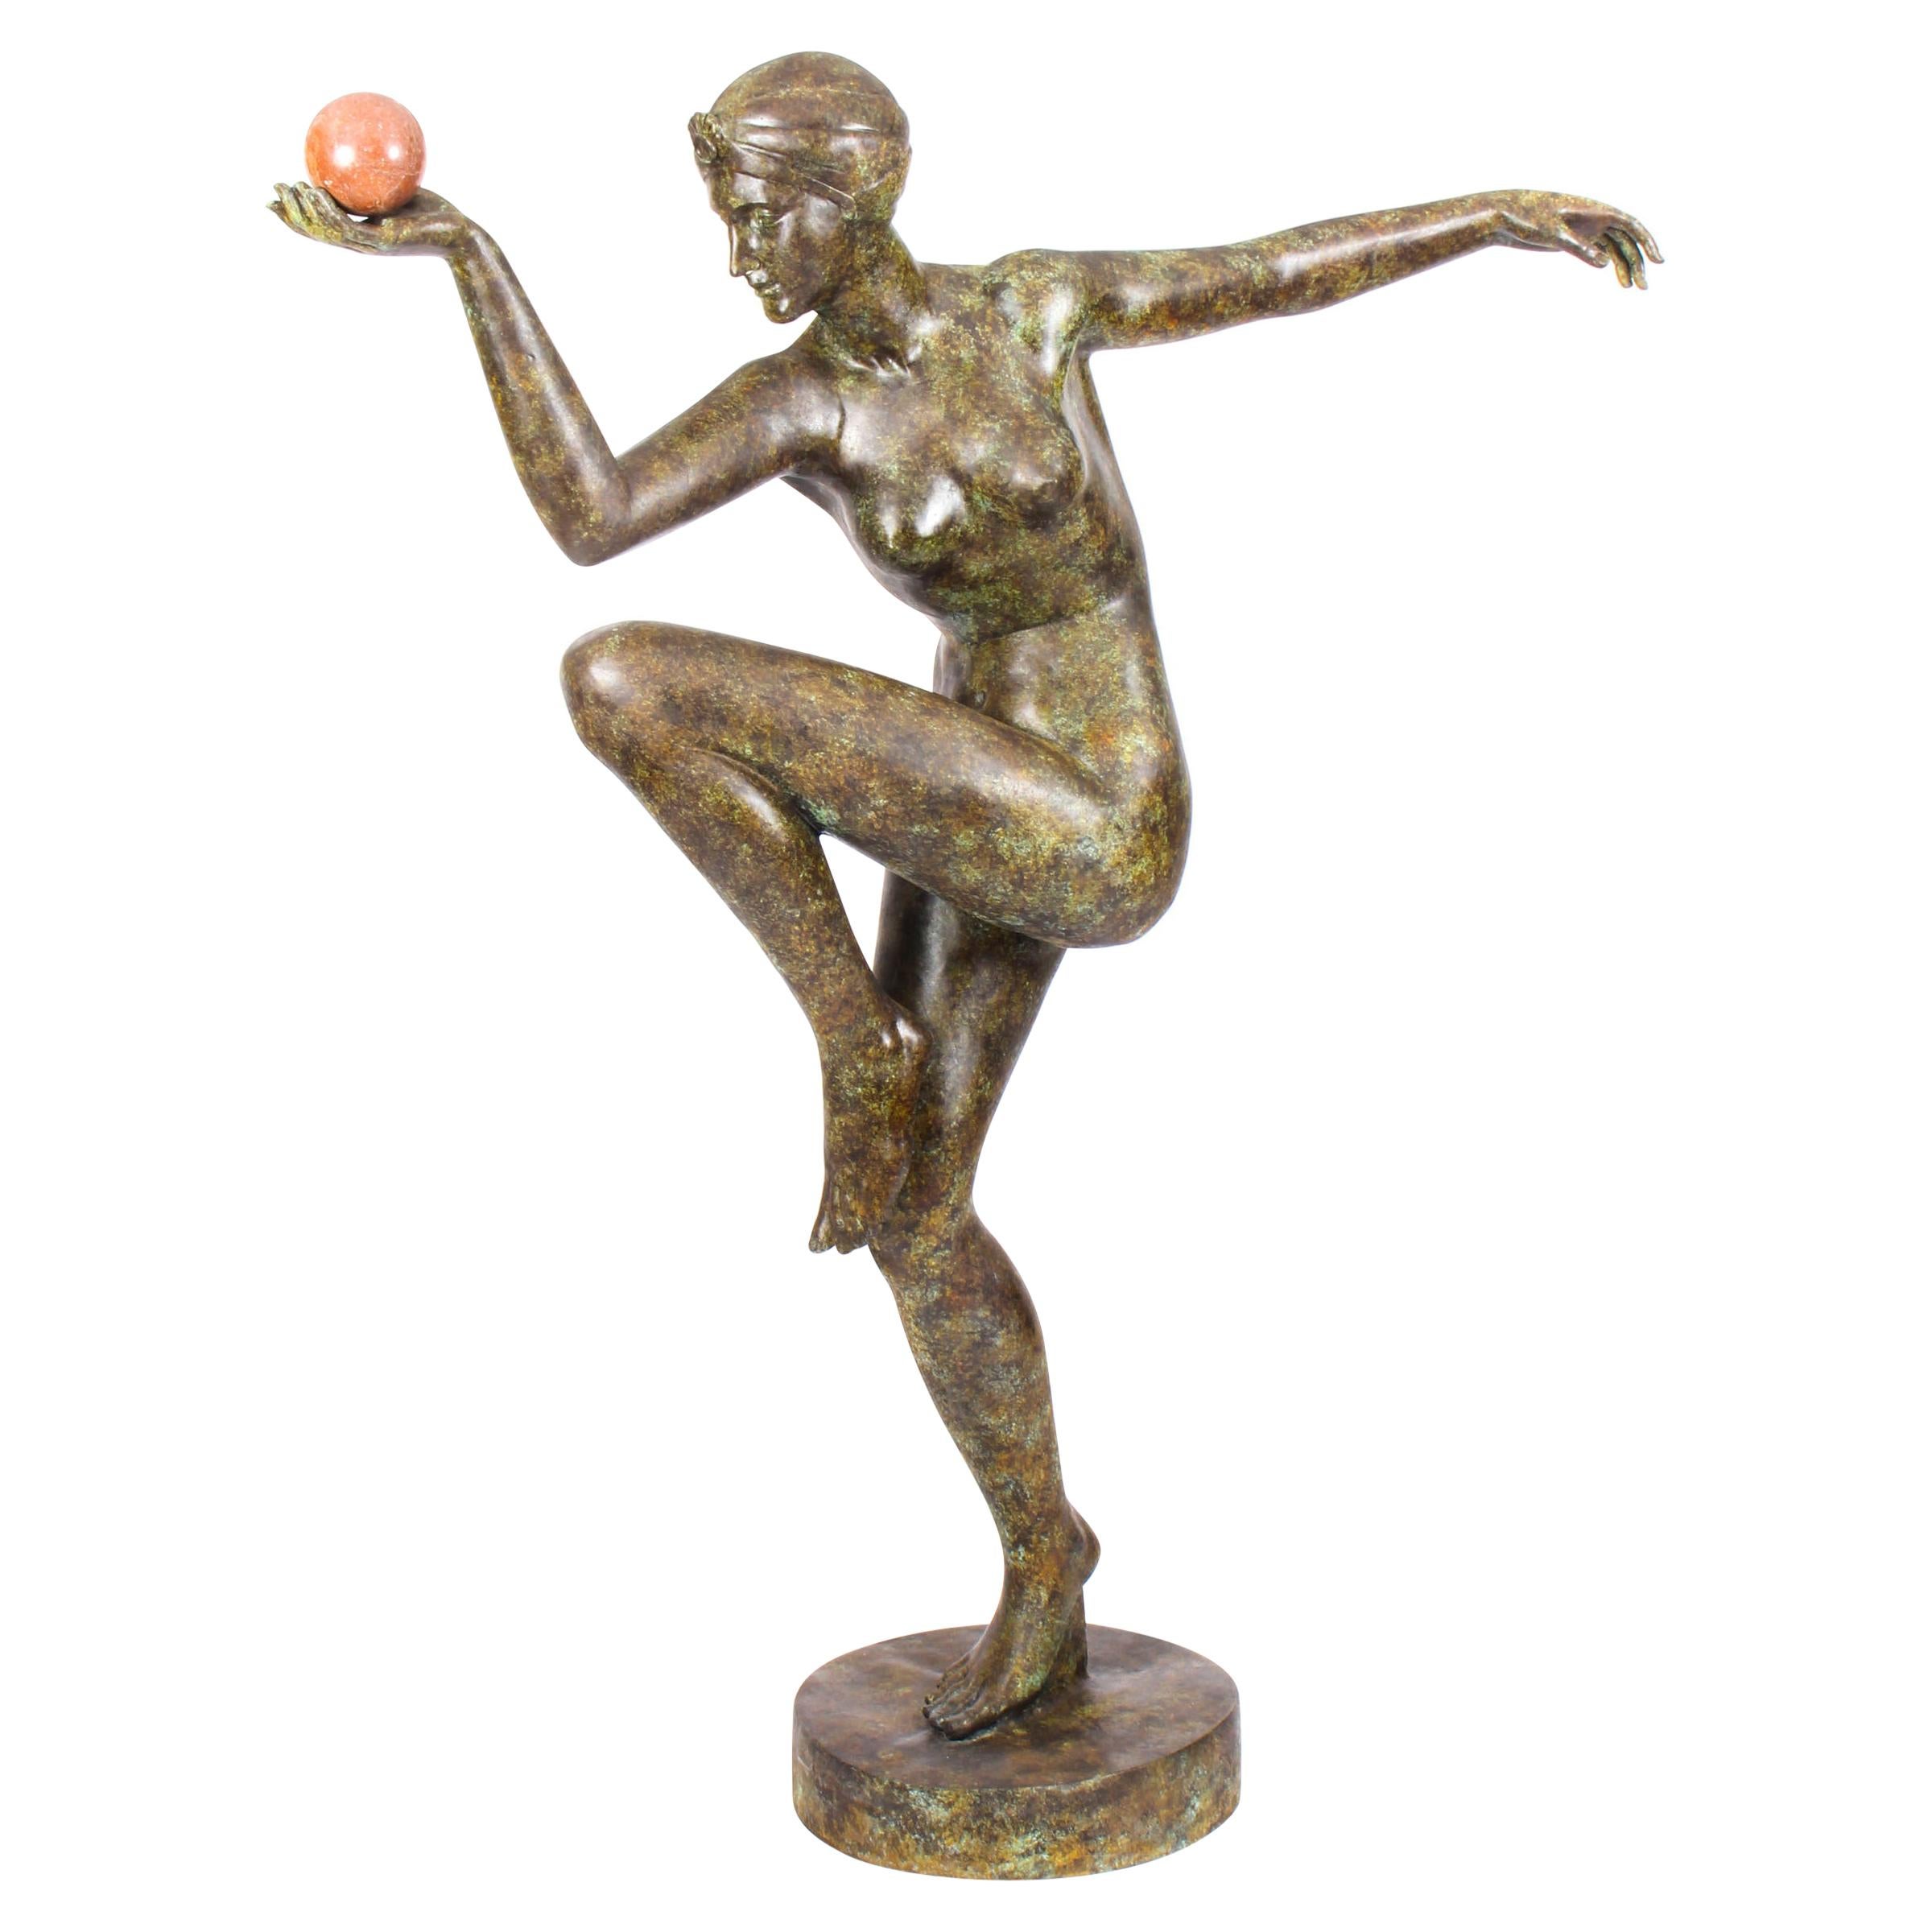 Vintage Art Deco Bronze Statue of Dancing Lady with Ball Late, 20th Century